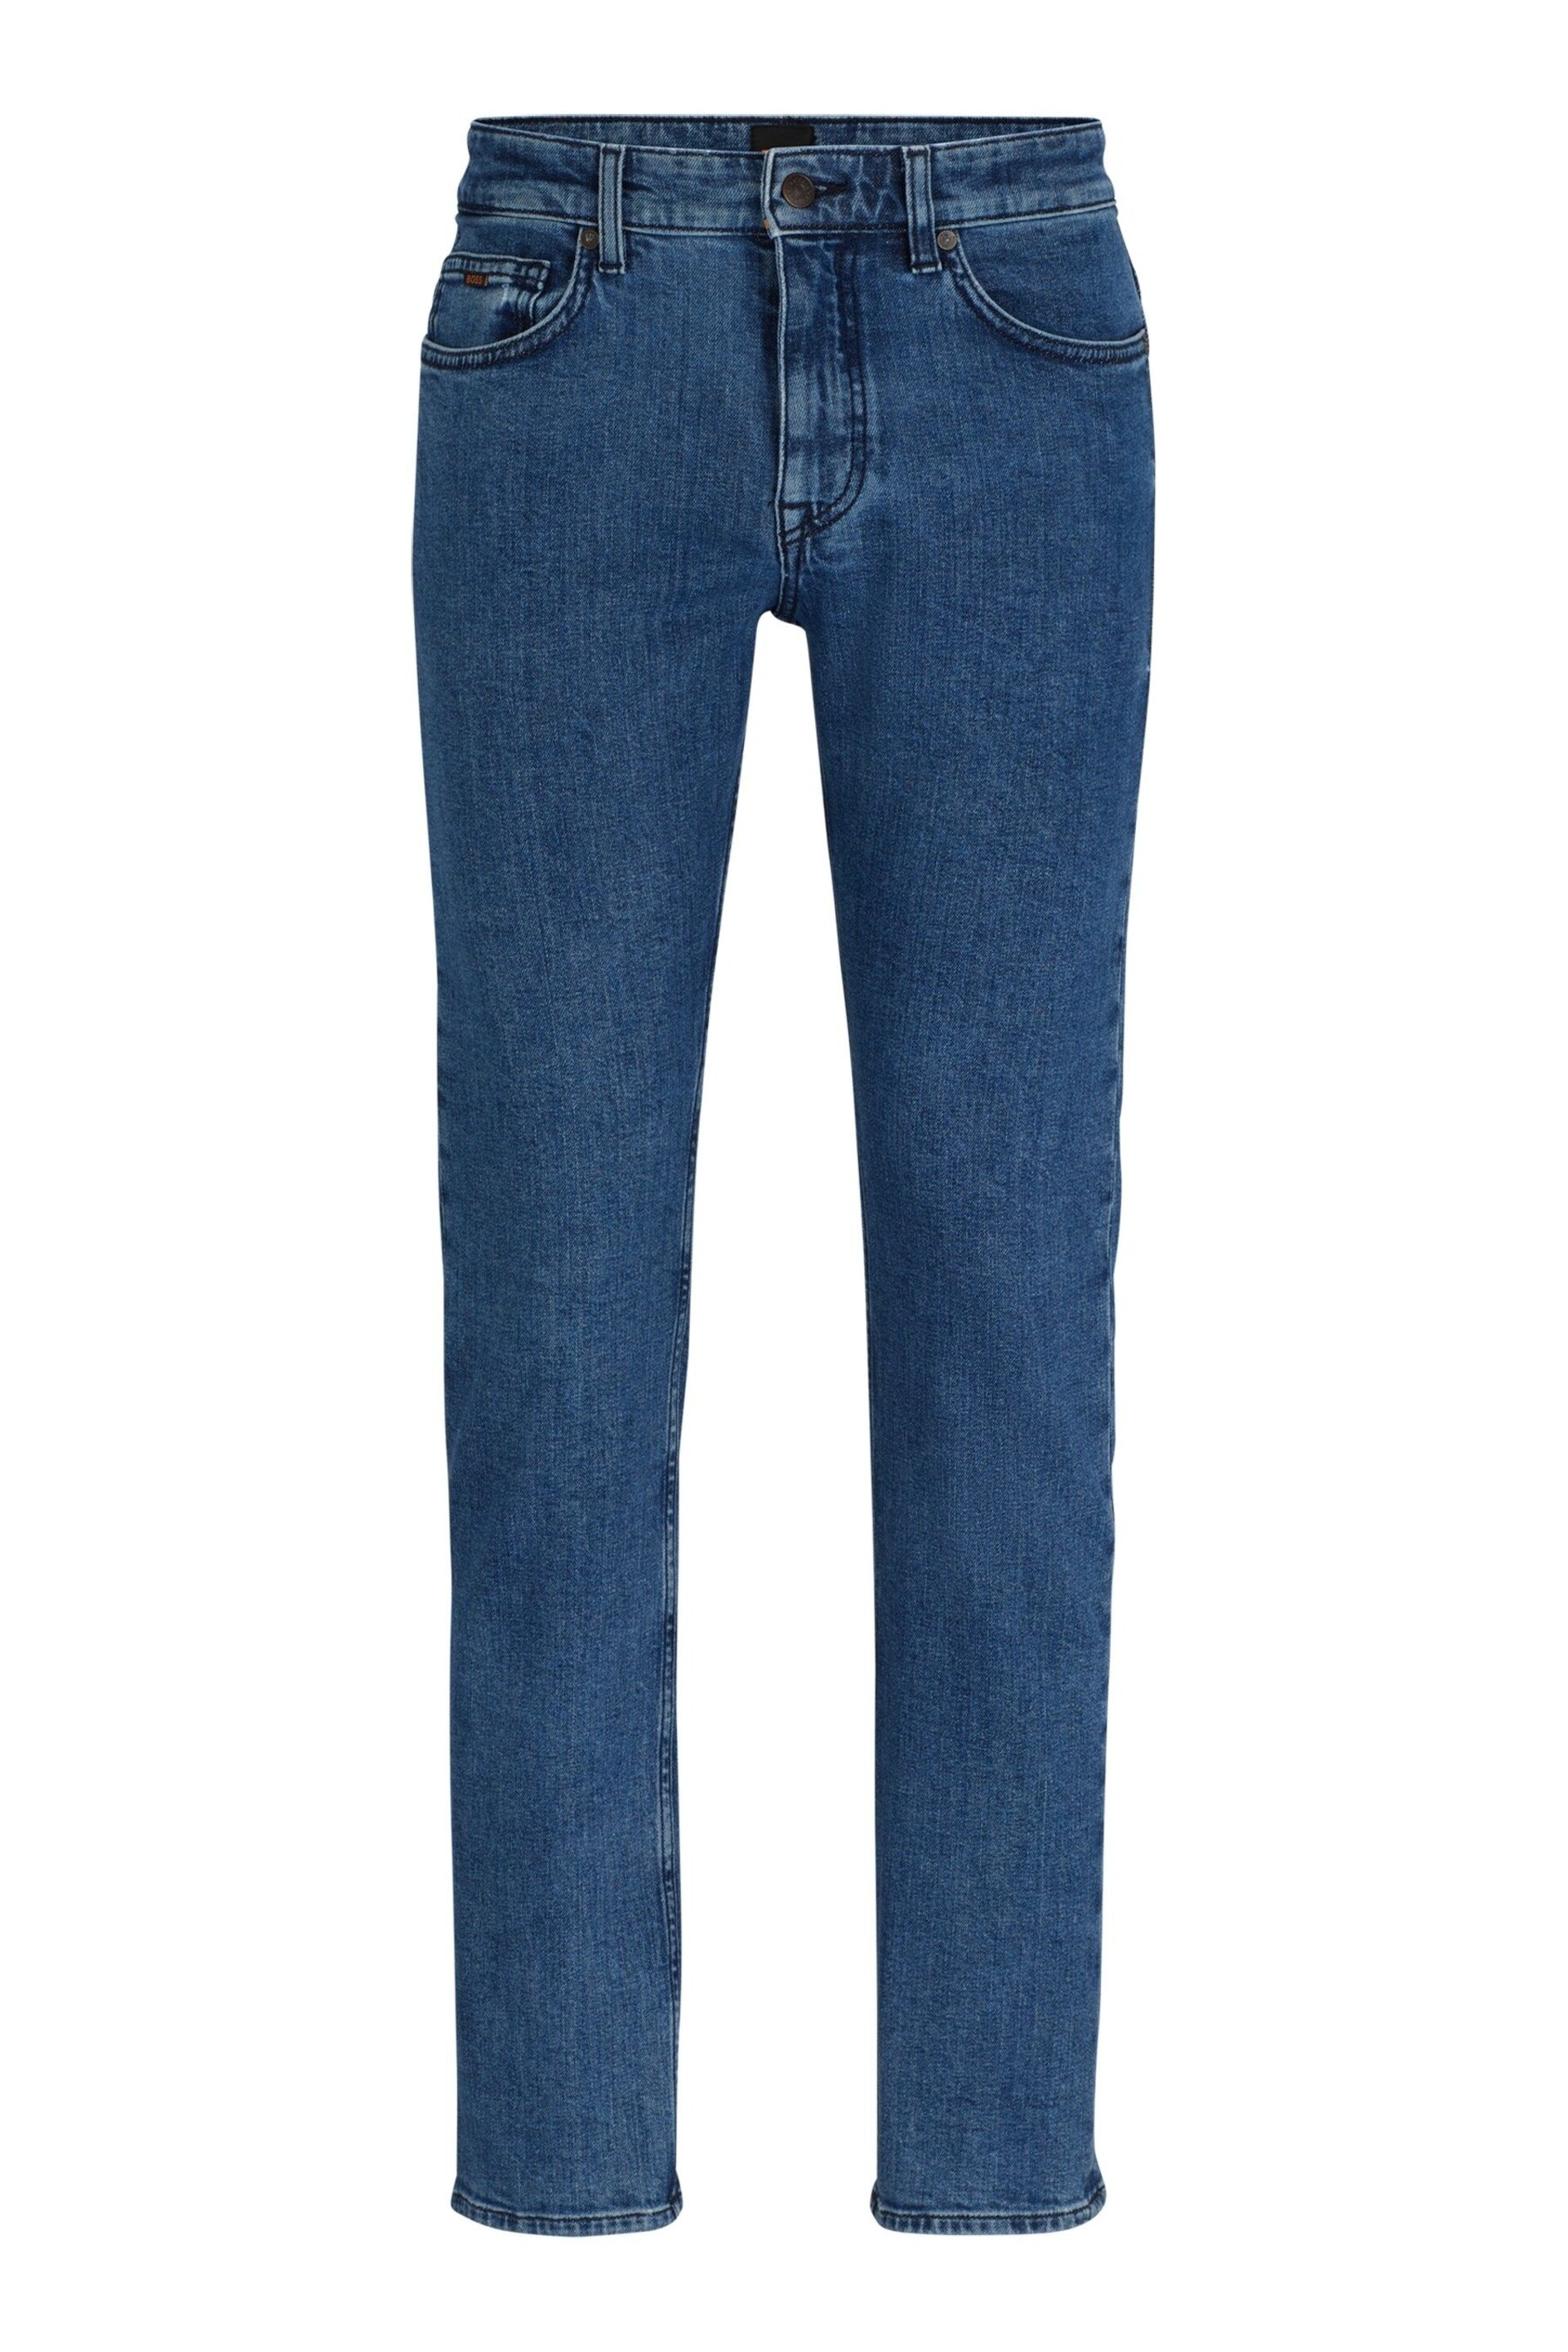 BOSS Mid Blue Maine Straight Fit Stretch Jeans - Image 5 of 5